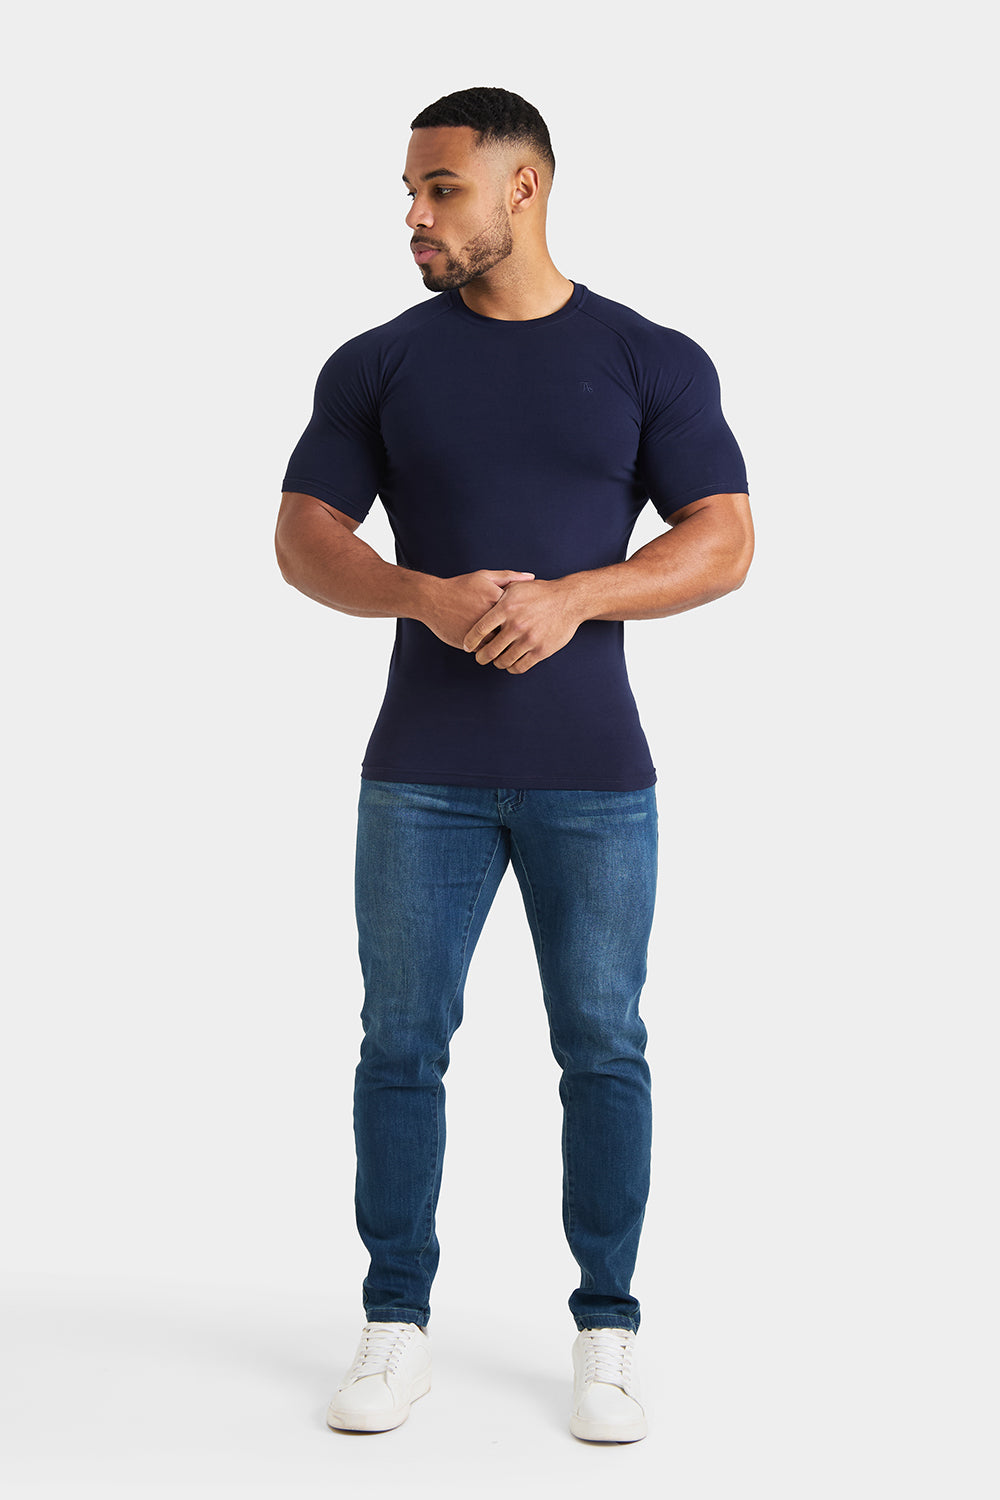 Longer Sleeve Muscle Fit T-Shirt in True Navy - TAILORED ATHLETE - ROW